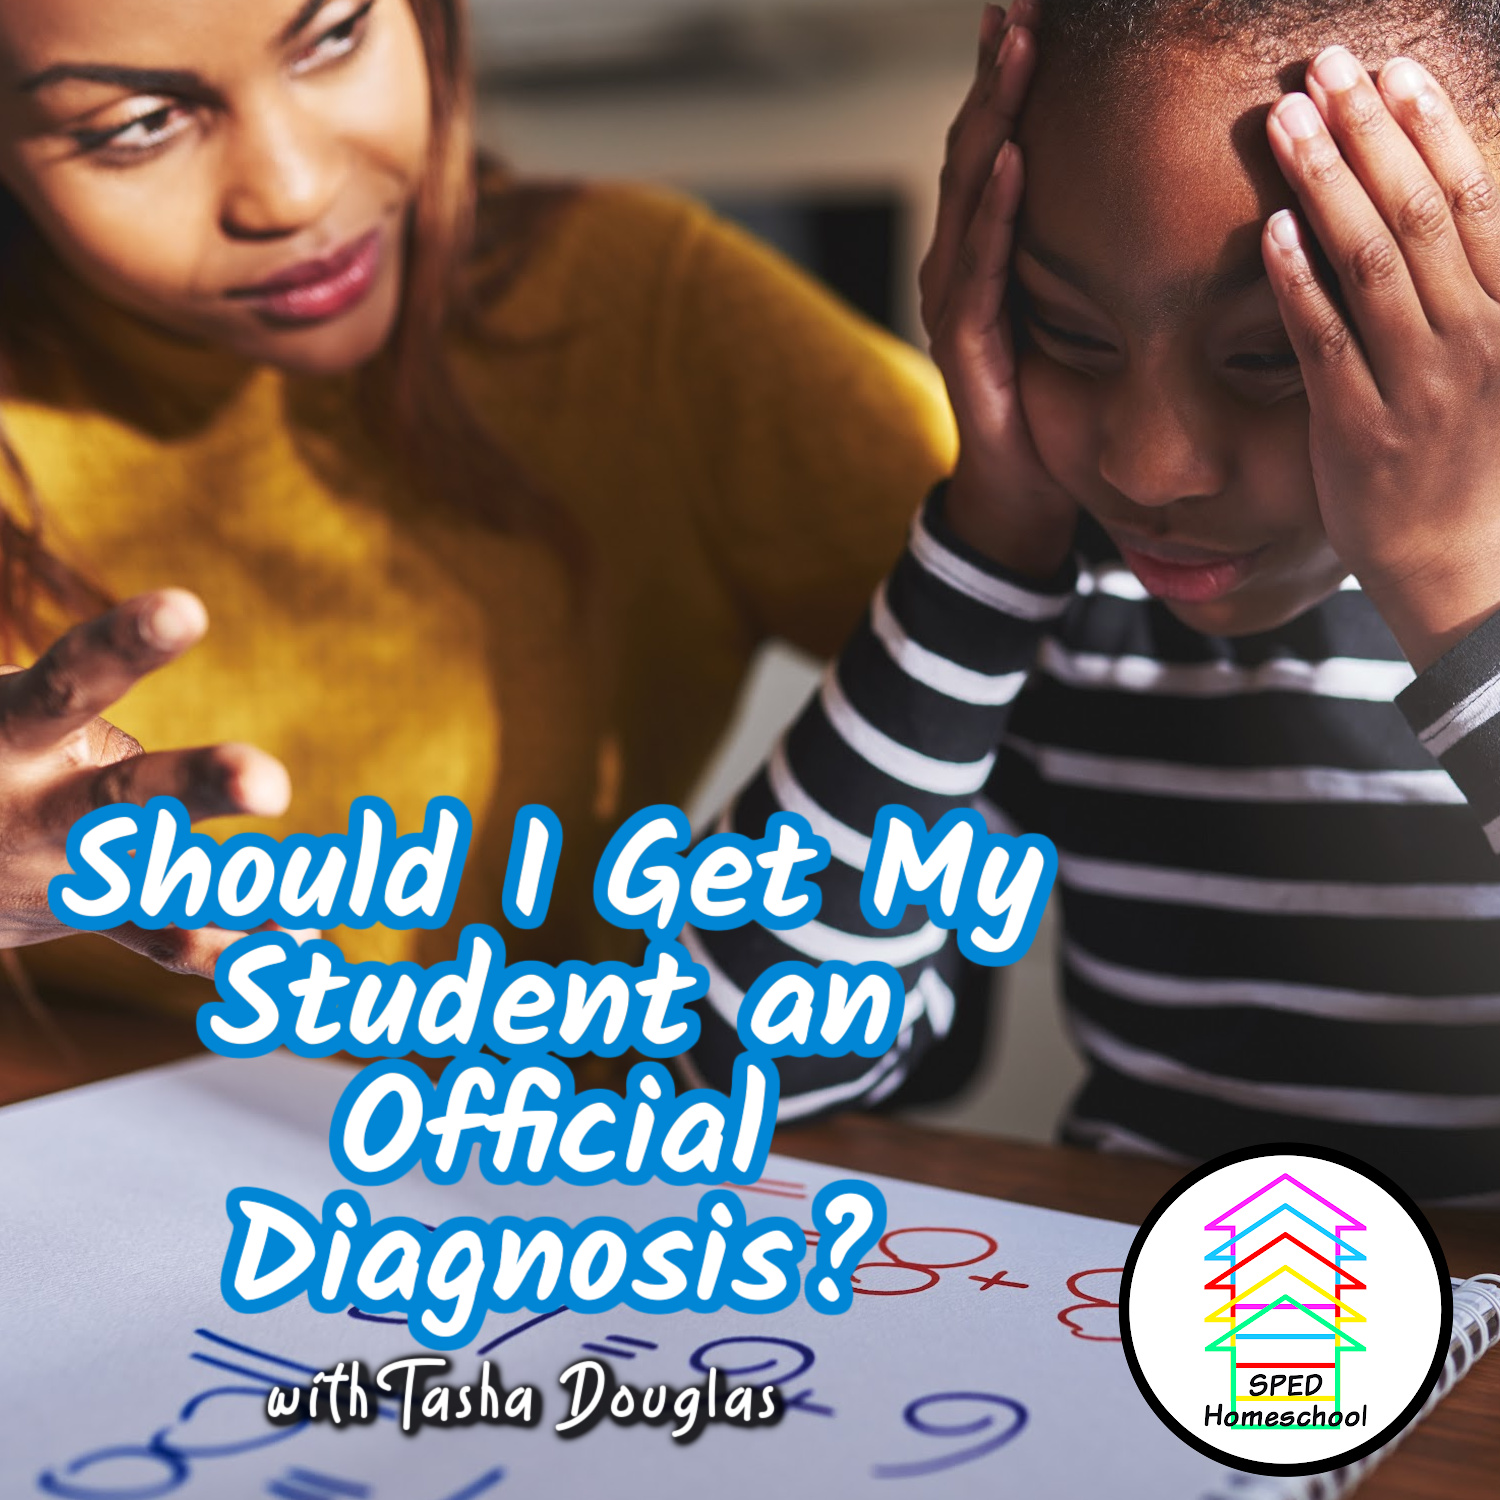 Should I Get My Student an Official Diagnosis?